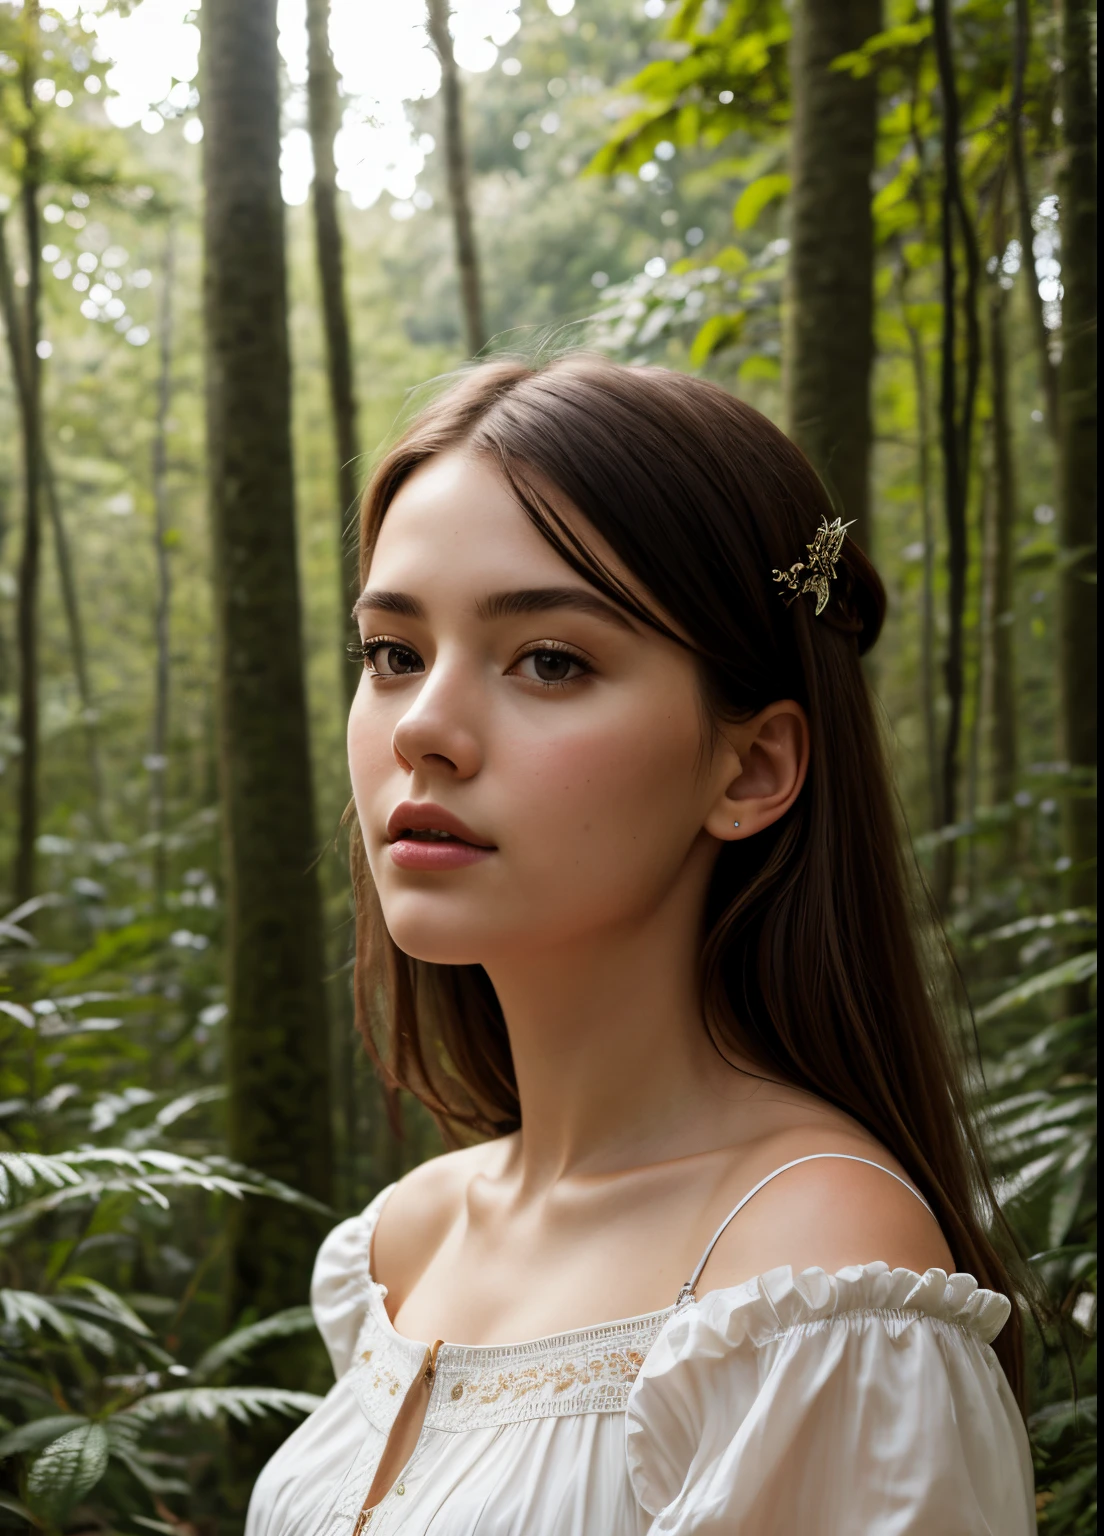 nffsw, 8K resolution, intricate detailes, sophisticated details, depth of fields, Photorealistic, absurd res, Medium portrait of one girl, wearing a puff shoulder blouse, at a forest, thick leaves, Tall trees, peaceful,